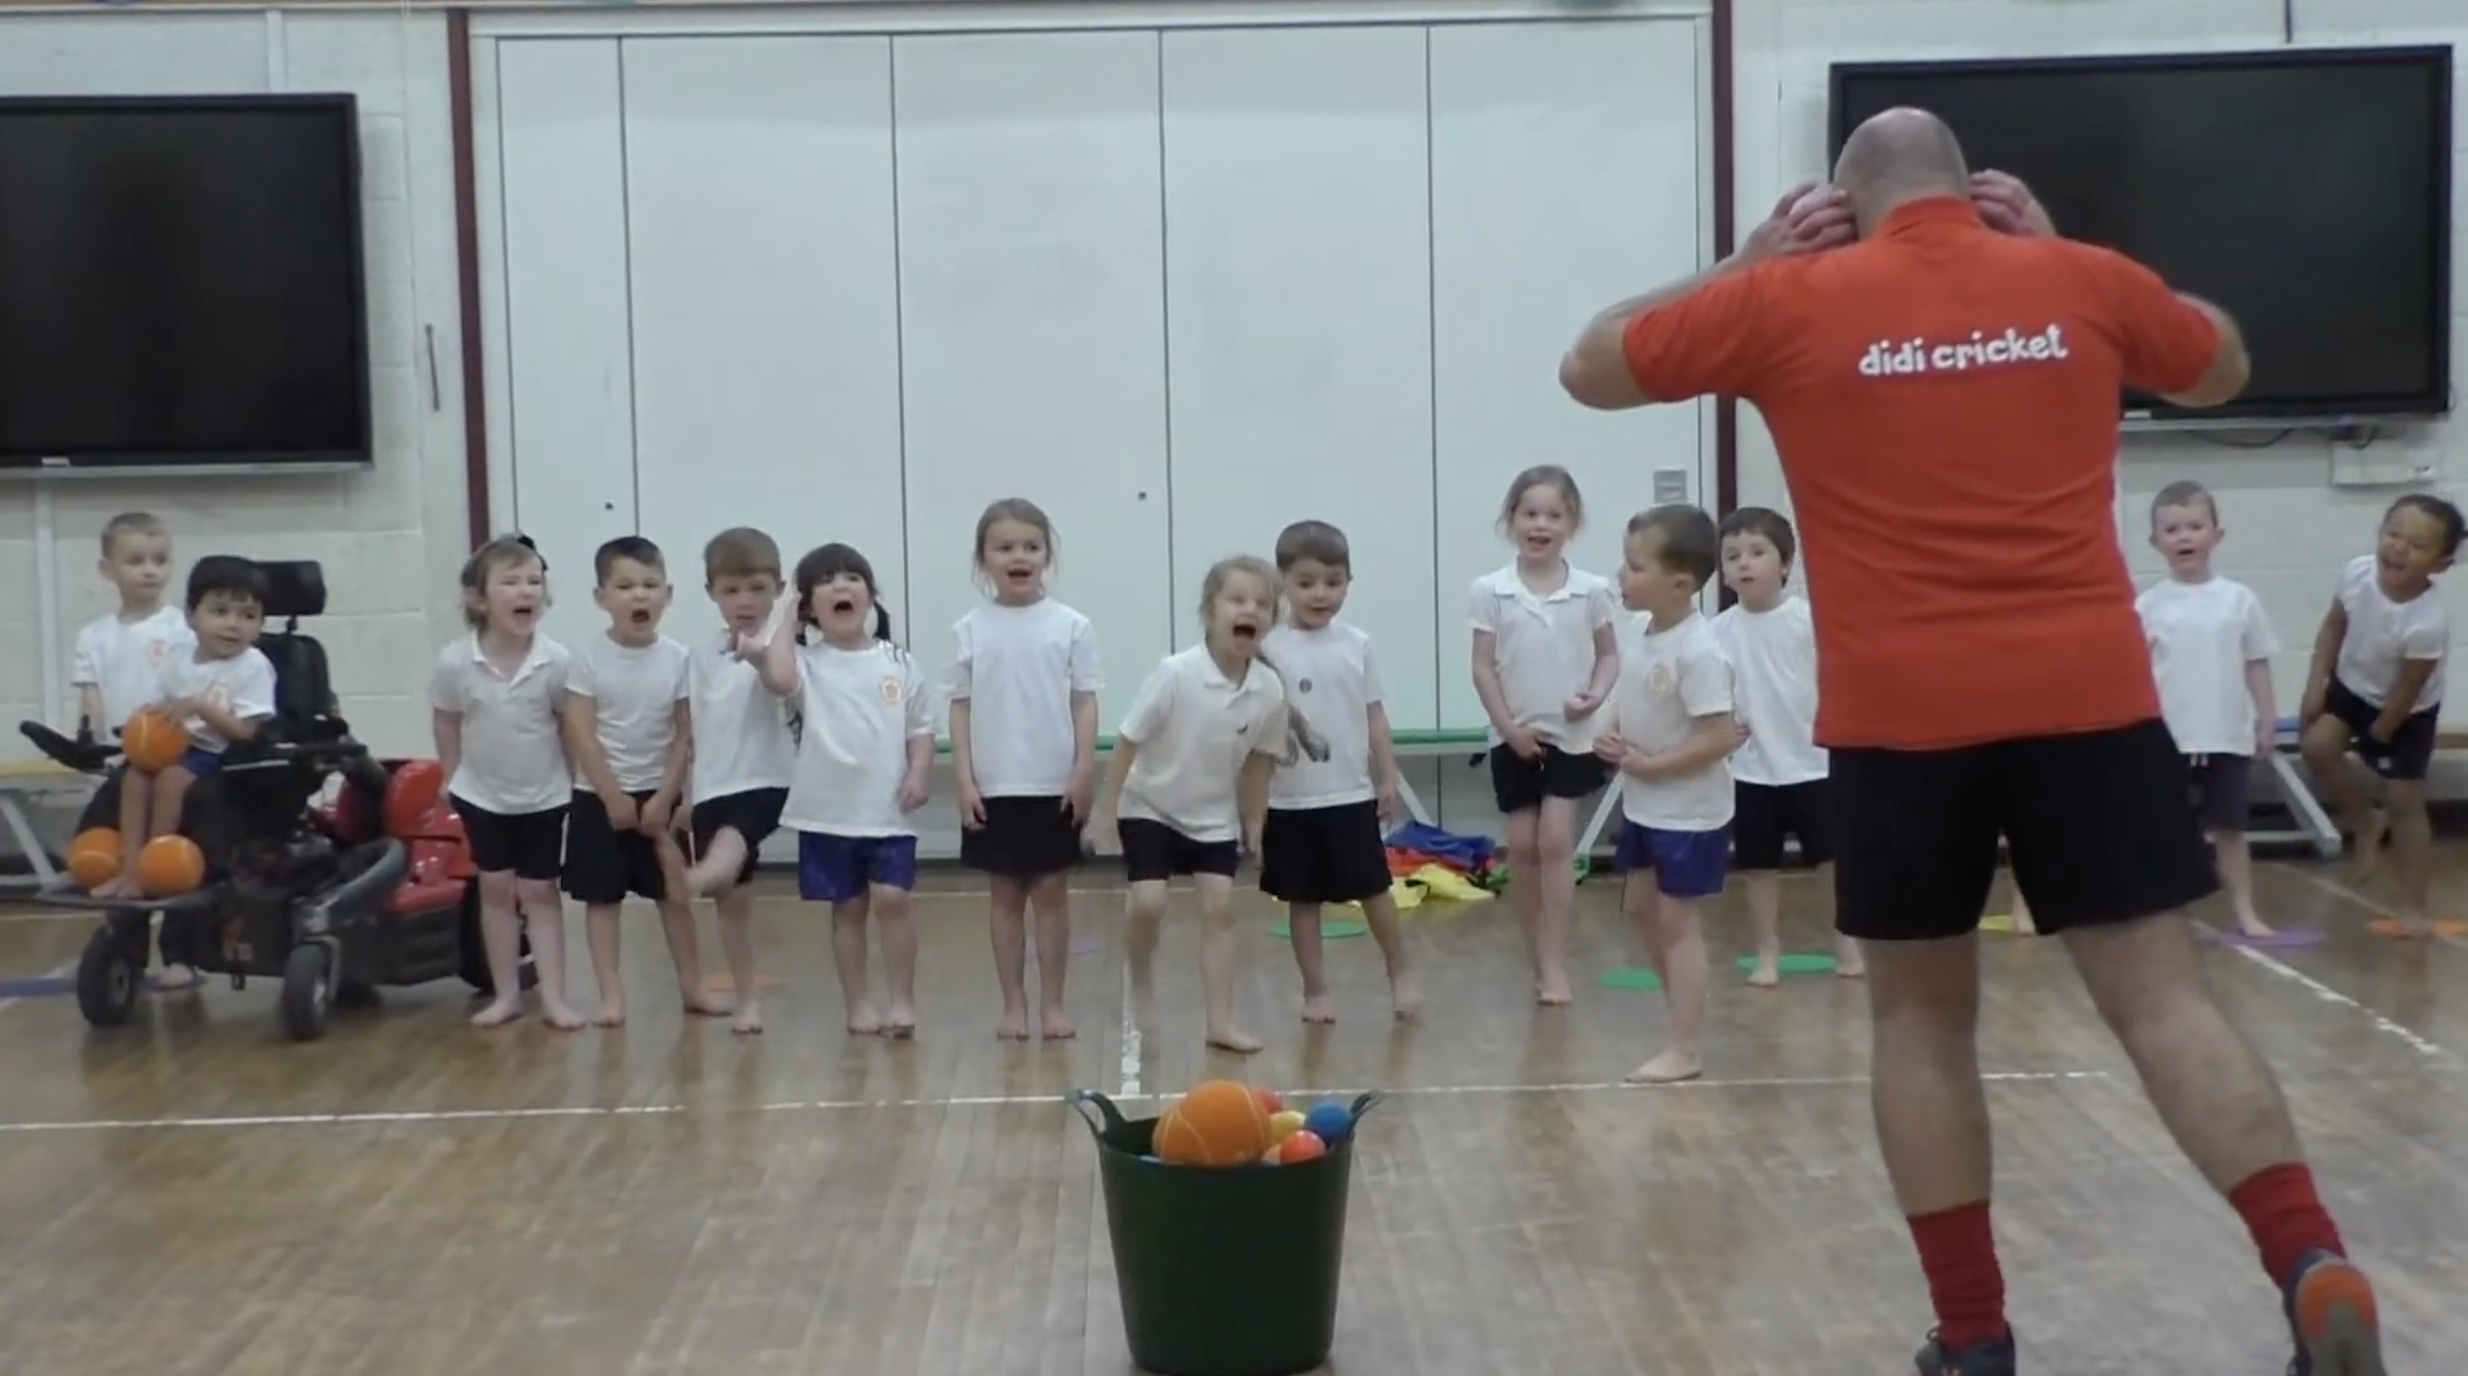 didi cricket coach Keith Smith has fun with a class of children in a sports hall